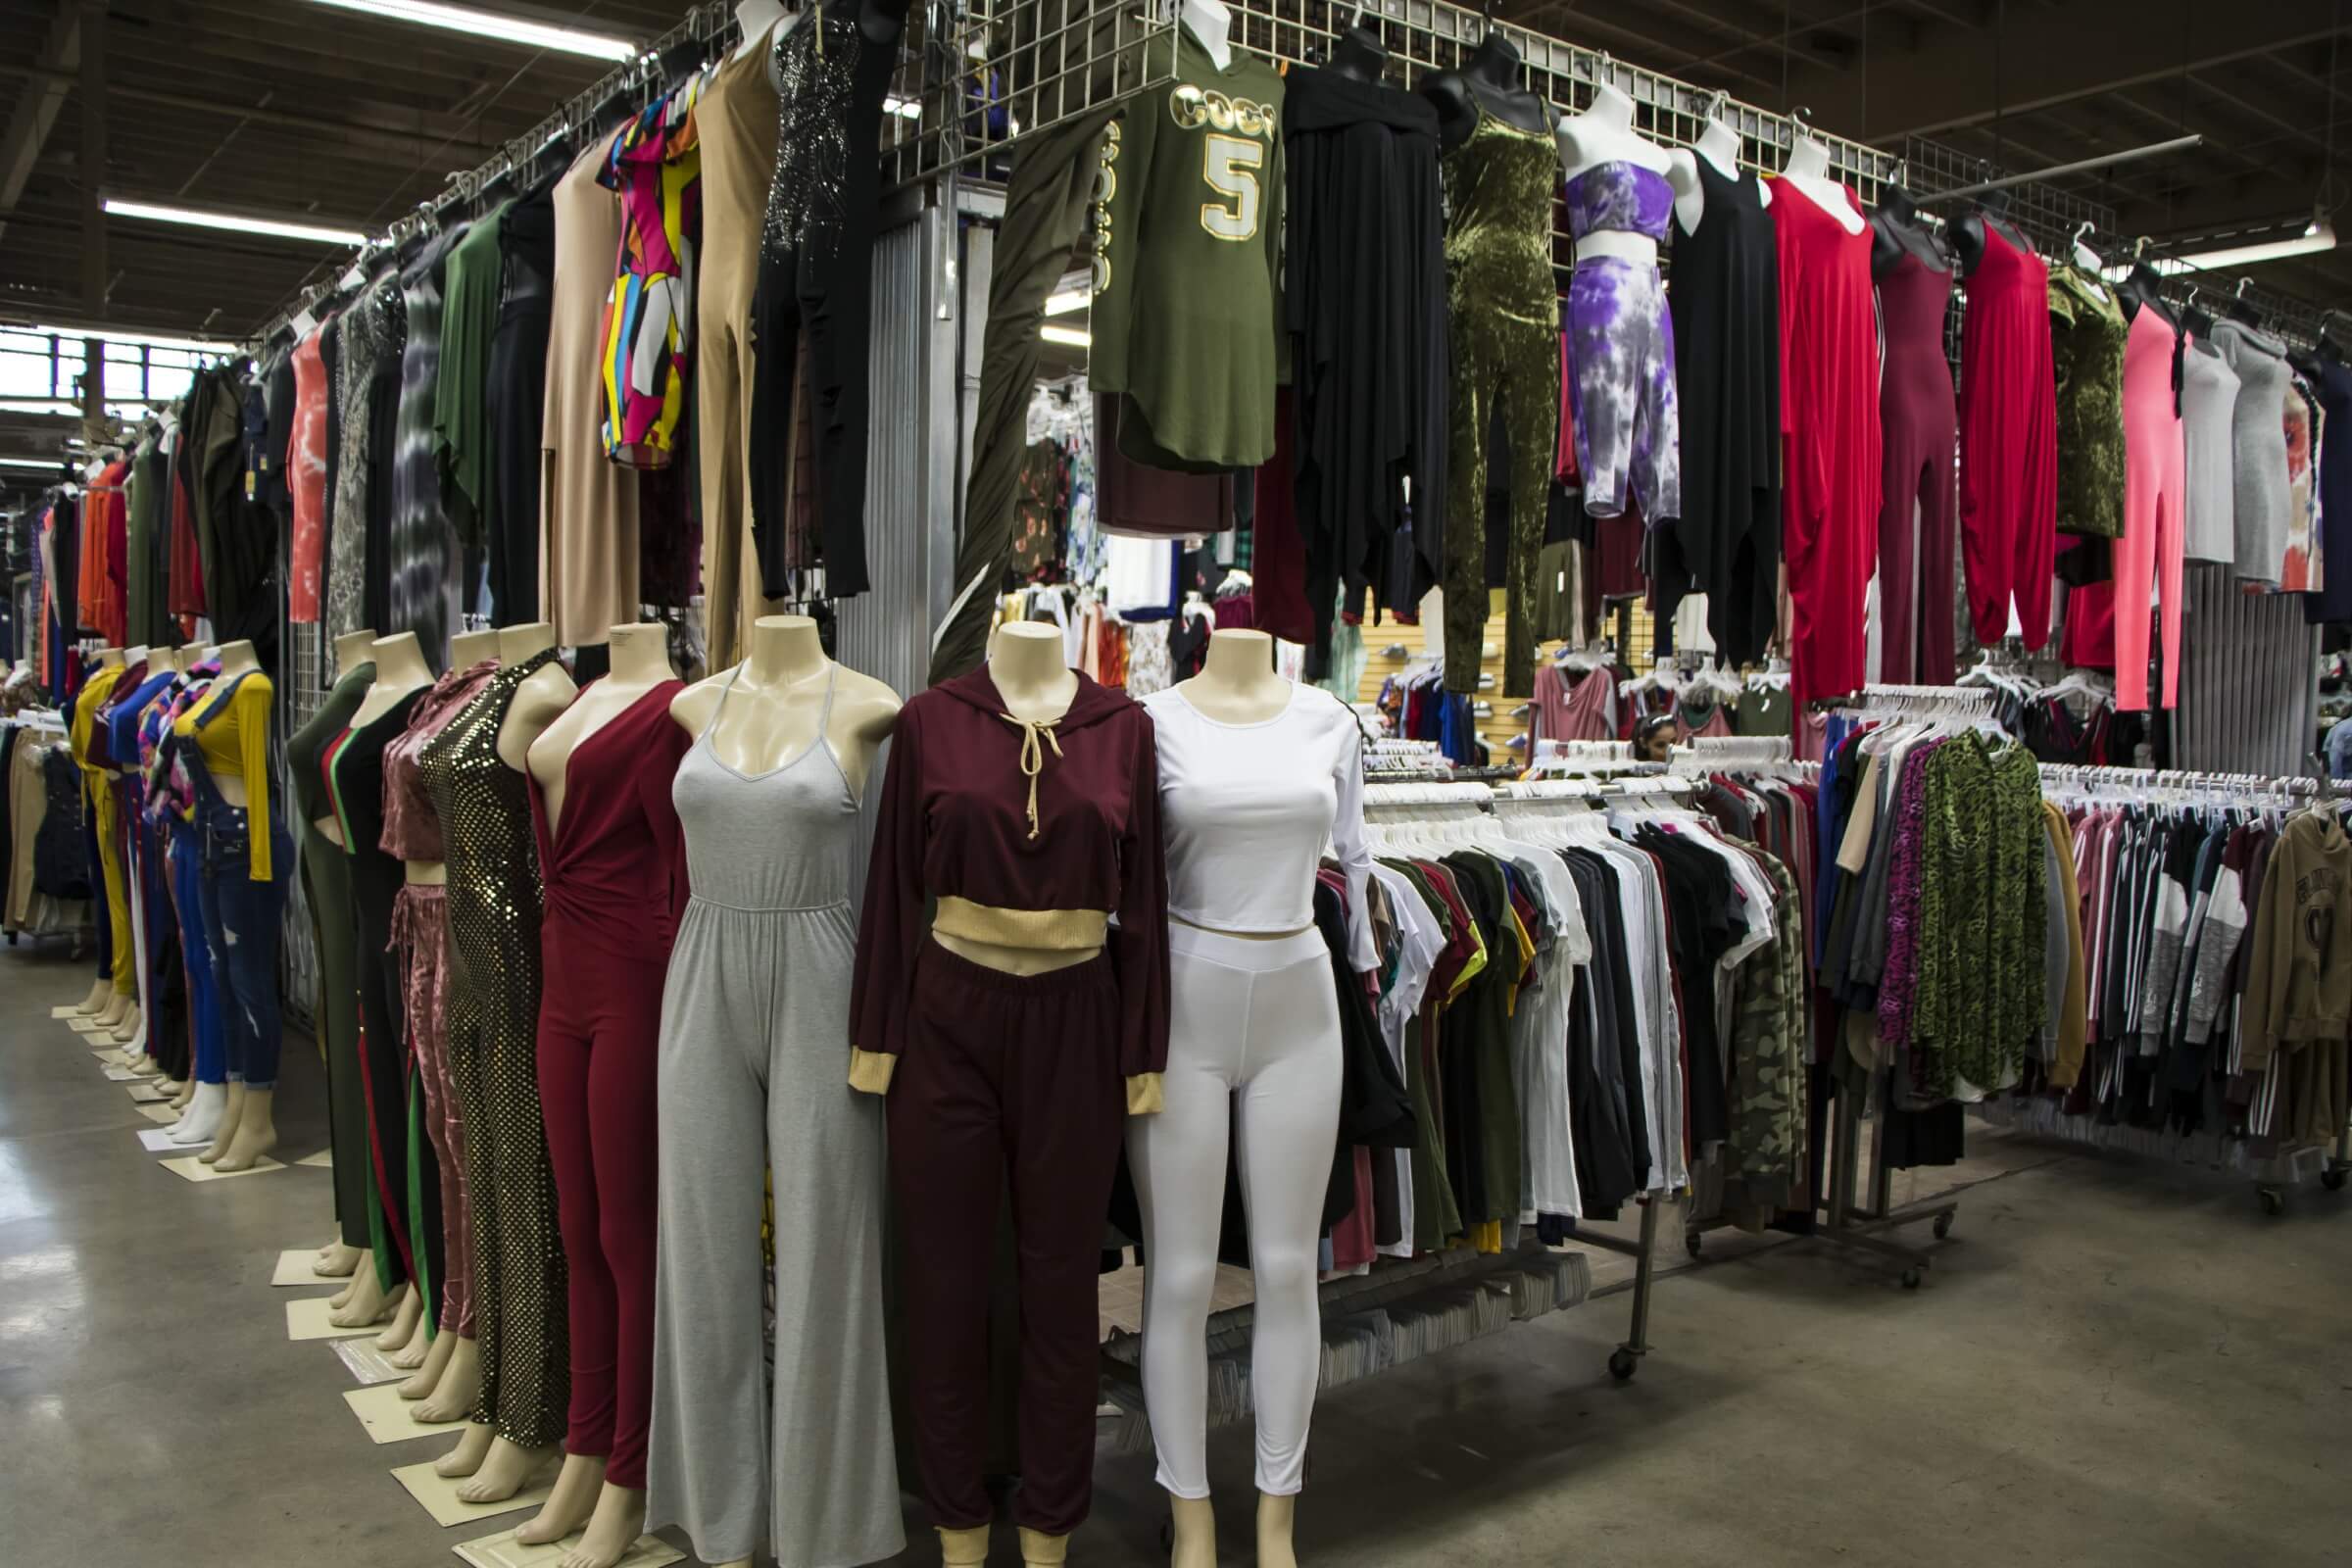 Ladies Clothing Stores in Los Angeles - Slauson Super Mall